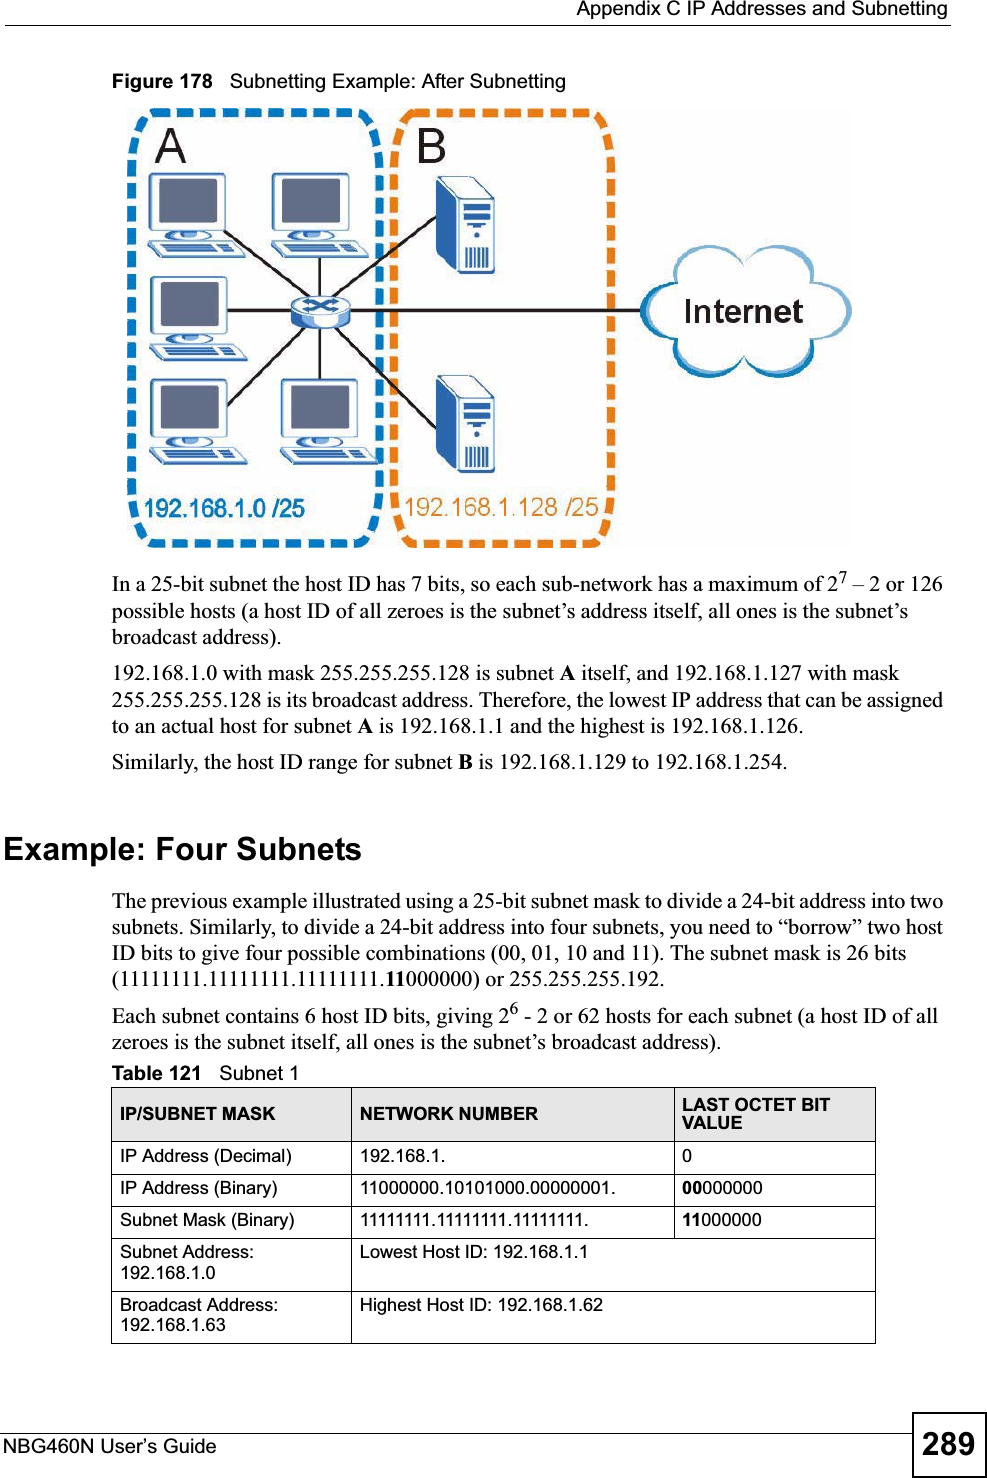  Appendix C IP Addresses and SubnettingNBG460N User’s Guide 289Figure 178   Subnetting Example: After SubnettingIn a 25-bit subnet the host ID has 7 bits, so each sub-network has a maximum of 27 – 2 or 126 possible hosts (a host ID of all zeroes is the subnet’s address itself, all ones is the subnet’s broadcast address).192.168.1.0 with mask 255.255.255.128 is subnet A itself, and 192.168.1.127 with mask 255.255.255.128 is its broadcast address. Therefore, the lowest IP address that can be assigned to an actual host for subnet A is 192.168.1.1 and the highest is 192.168.1.126. Similarly, the host ID range for subnet B is 192.168.1.129 to 192.168.1.254.Example: Four Subnets The previous example illustrated using a 25-bit subnet mask to divide a 24-bit address into two subnets. Similarly, to divide a 24-bit address into four subnets, you need to “borrow” two host ID bits to give four possible combinations (00, 01, 10 and 11). The subnet mask is 26 bits (11111111.11111111.11111111.11000000) or 255.255.255.192. Each subnet contains 6 host ID bits, giving 26 - 2 or 62 hosts for each subnet (a host ID of all zeroes is the subnet itself, all ones is the subnet’s broadcast address). Table 121   Subnet 1IP/SUBNET MASK NETWORK NUMBER LAST OCTET BIT VALUEIP Address (Decimal) 192.168.1. 0IP Address (Binary) 11000000.10101000.00000001. 00000000Subnet Mask (Binary) 11111111.11111111.11111111. 11000000Subnet Address: 192.168.1.0Lowest Host ID: 192.168.1.1Broadcast Address: 192.168.1.63Highest Host ID: 192.168.1.62